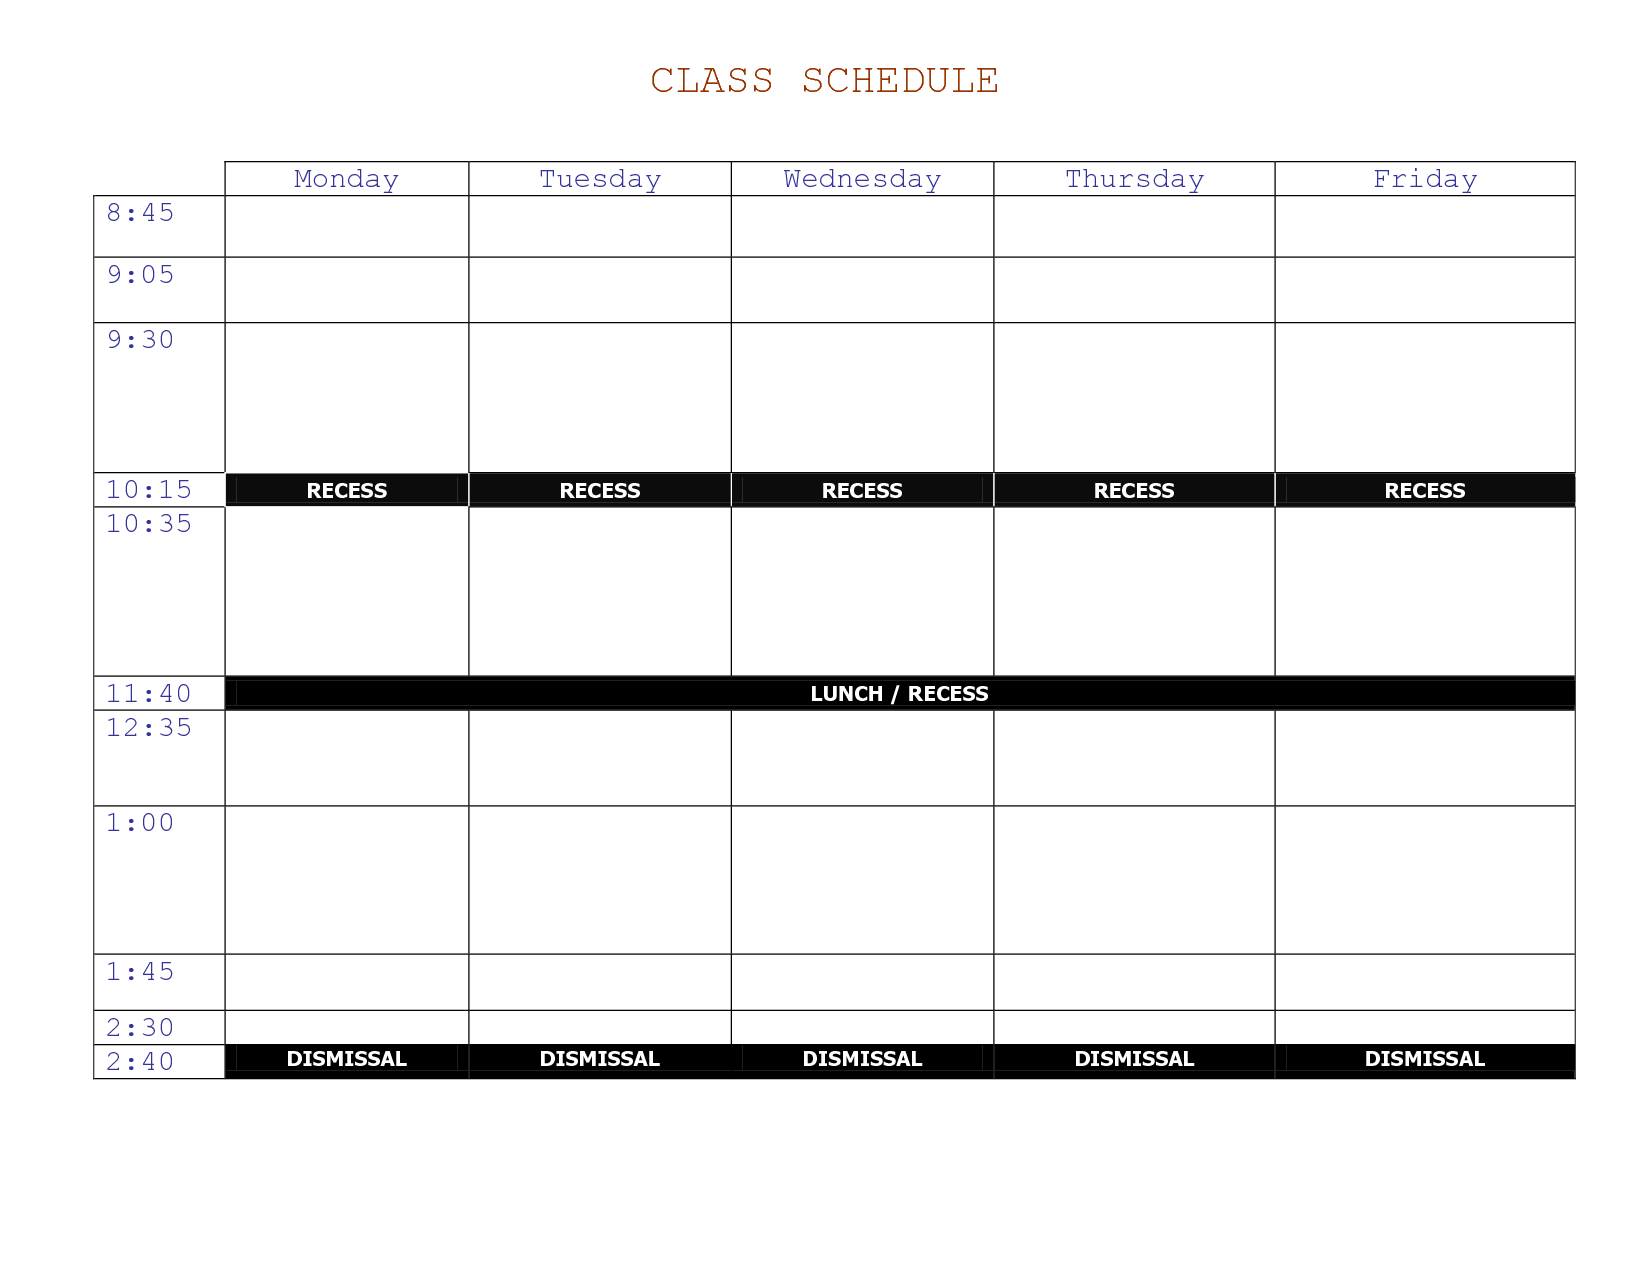 7-best-images-of-printable-class-schedule-maker-class-schedule-maker